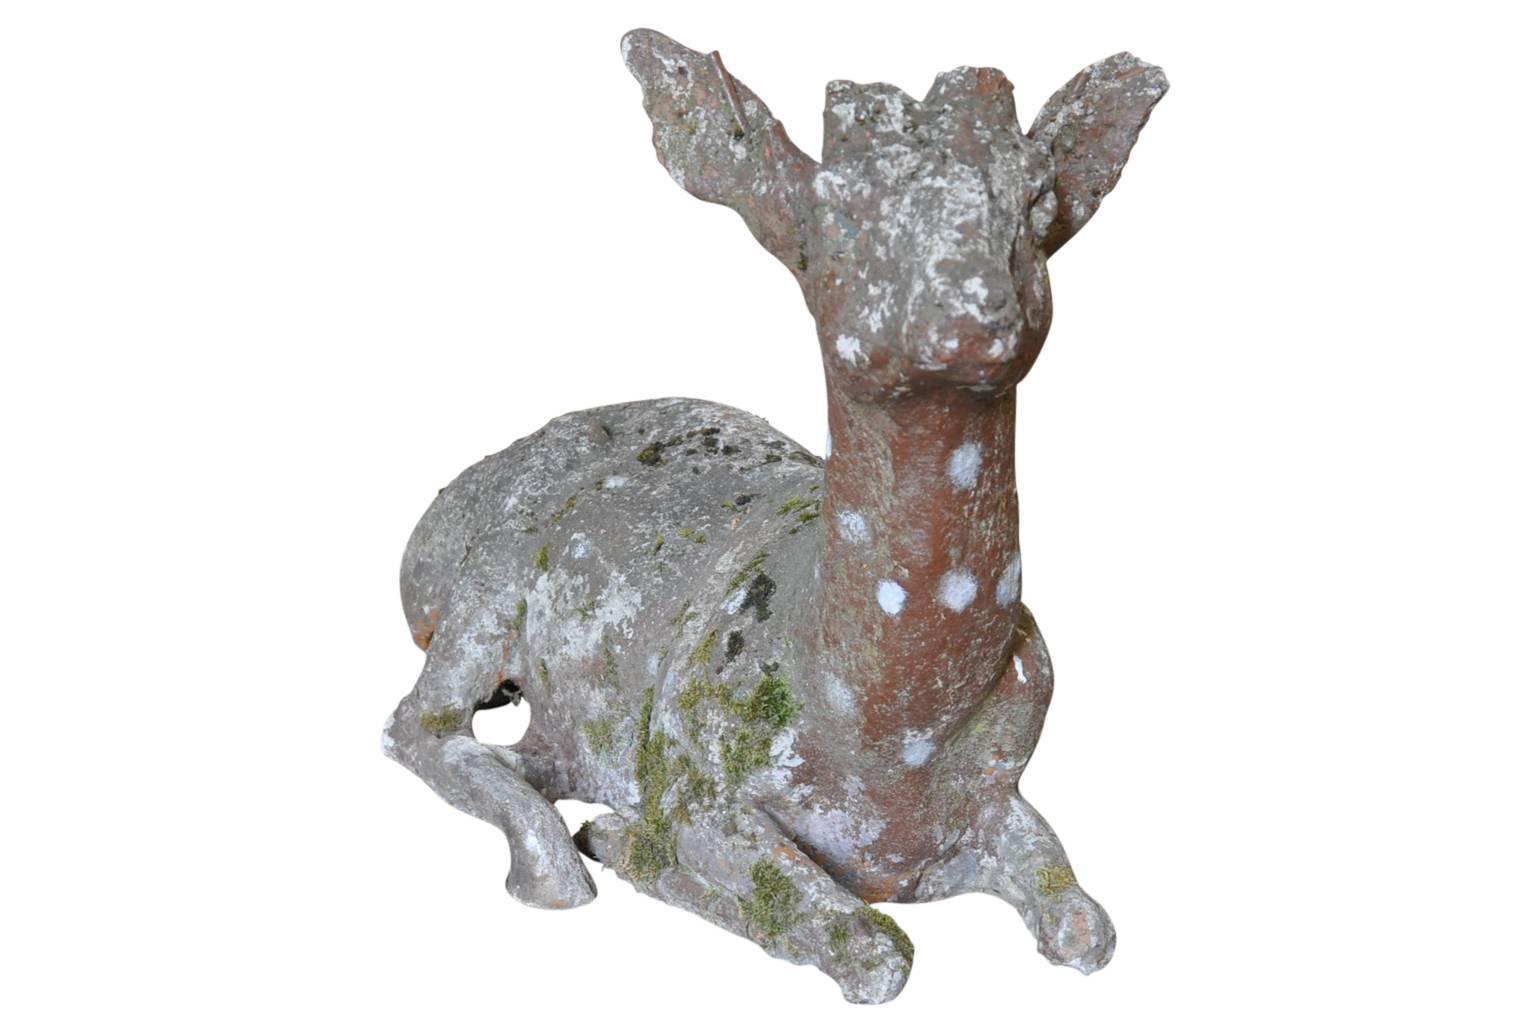 An absolutely charming French 19th century statue of a recumbent deer beautifully crafted in coade stone. Wonderful detail and beautiful face. A perfect accent for any garden or interior.